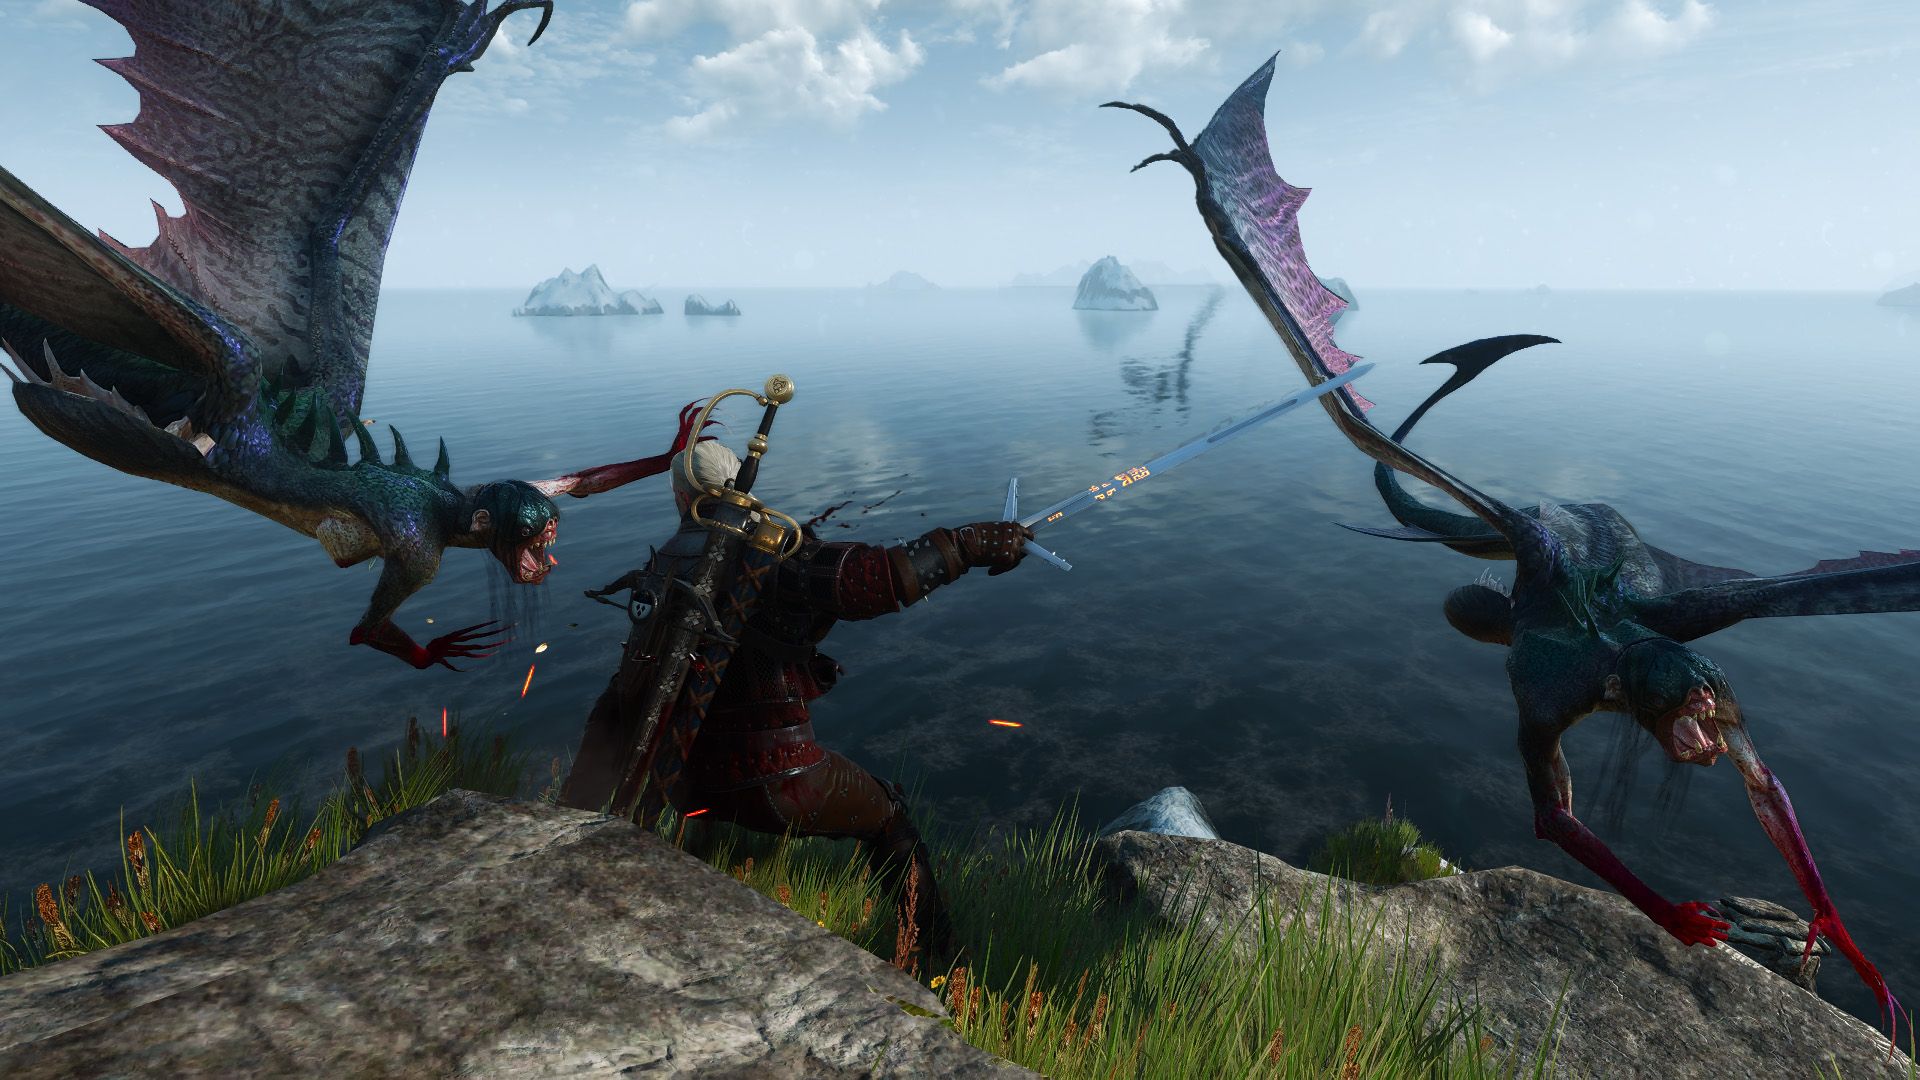 Geralt fights a pair of monsters on a cliff in Skellige.